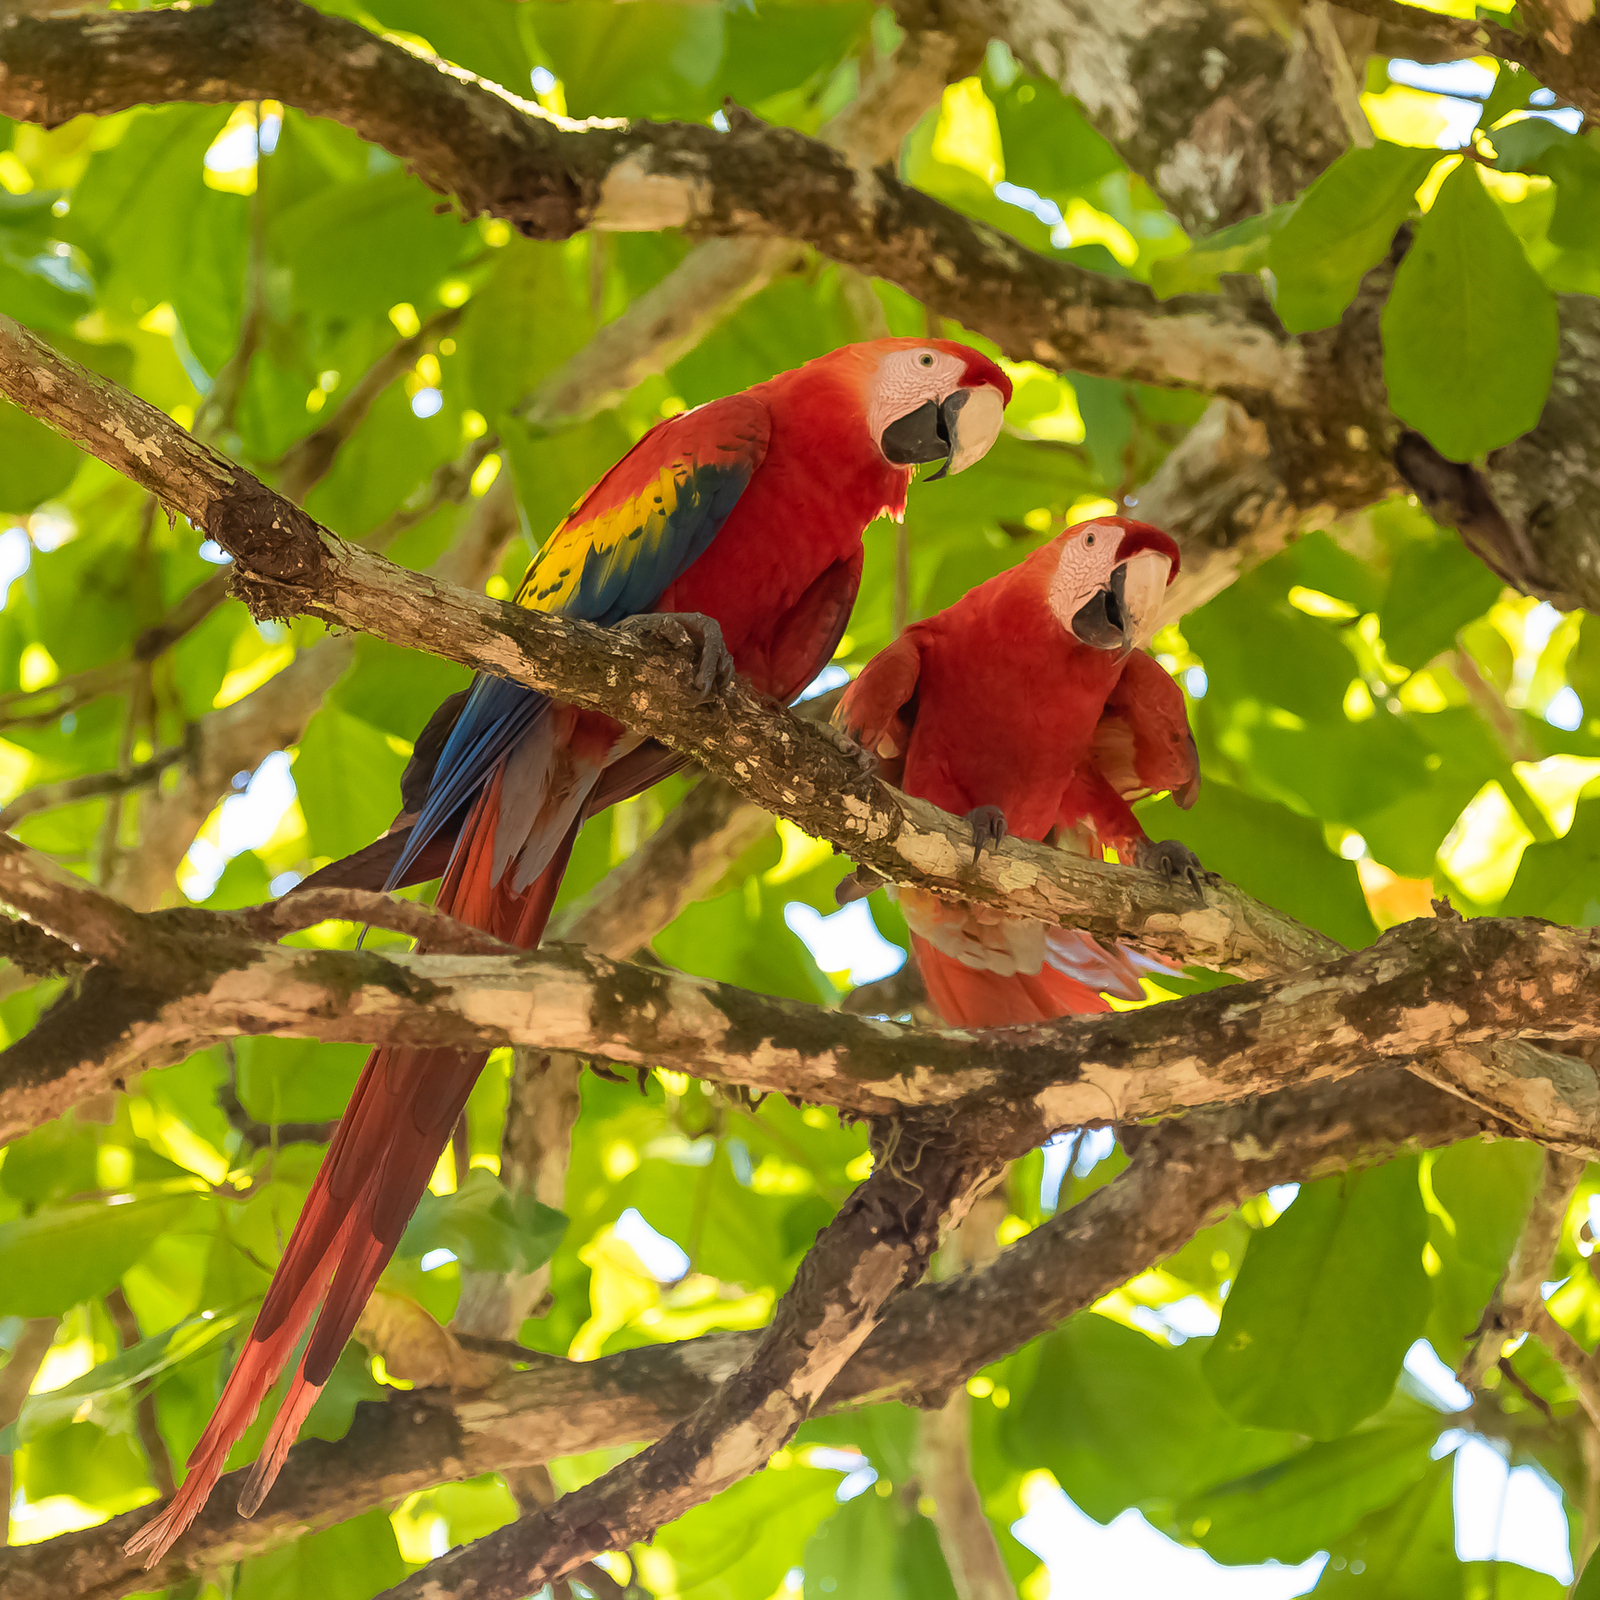 Scarlet macaws (Ara macao) in Costa Rica. Image Credit: © Gueret Pascale | Dreamstime.com.